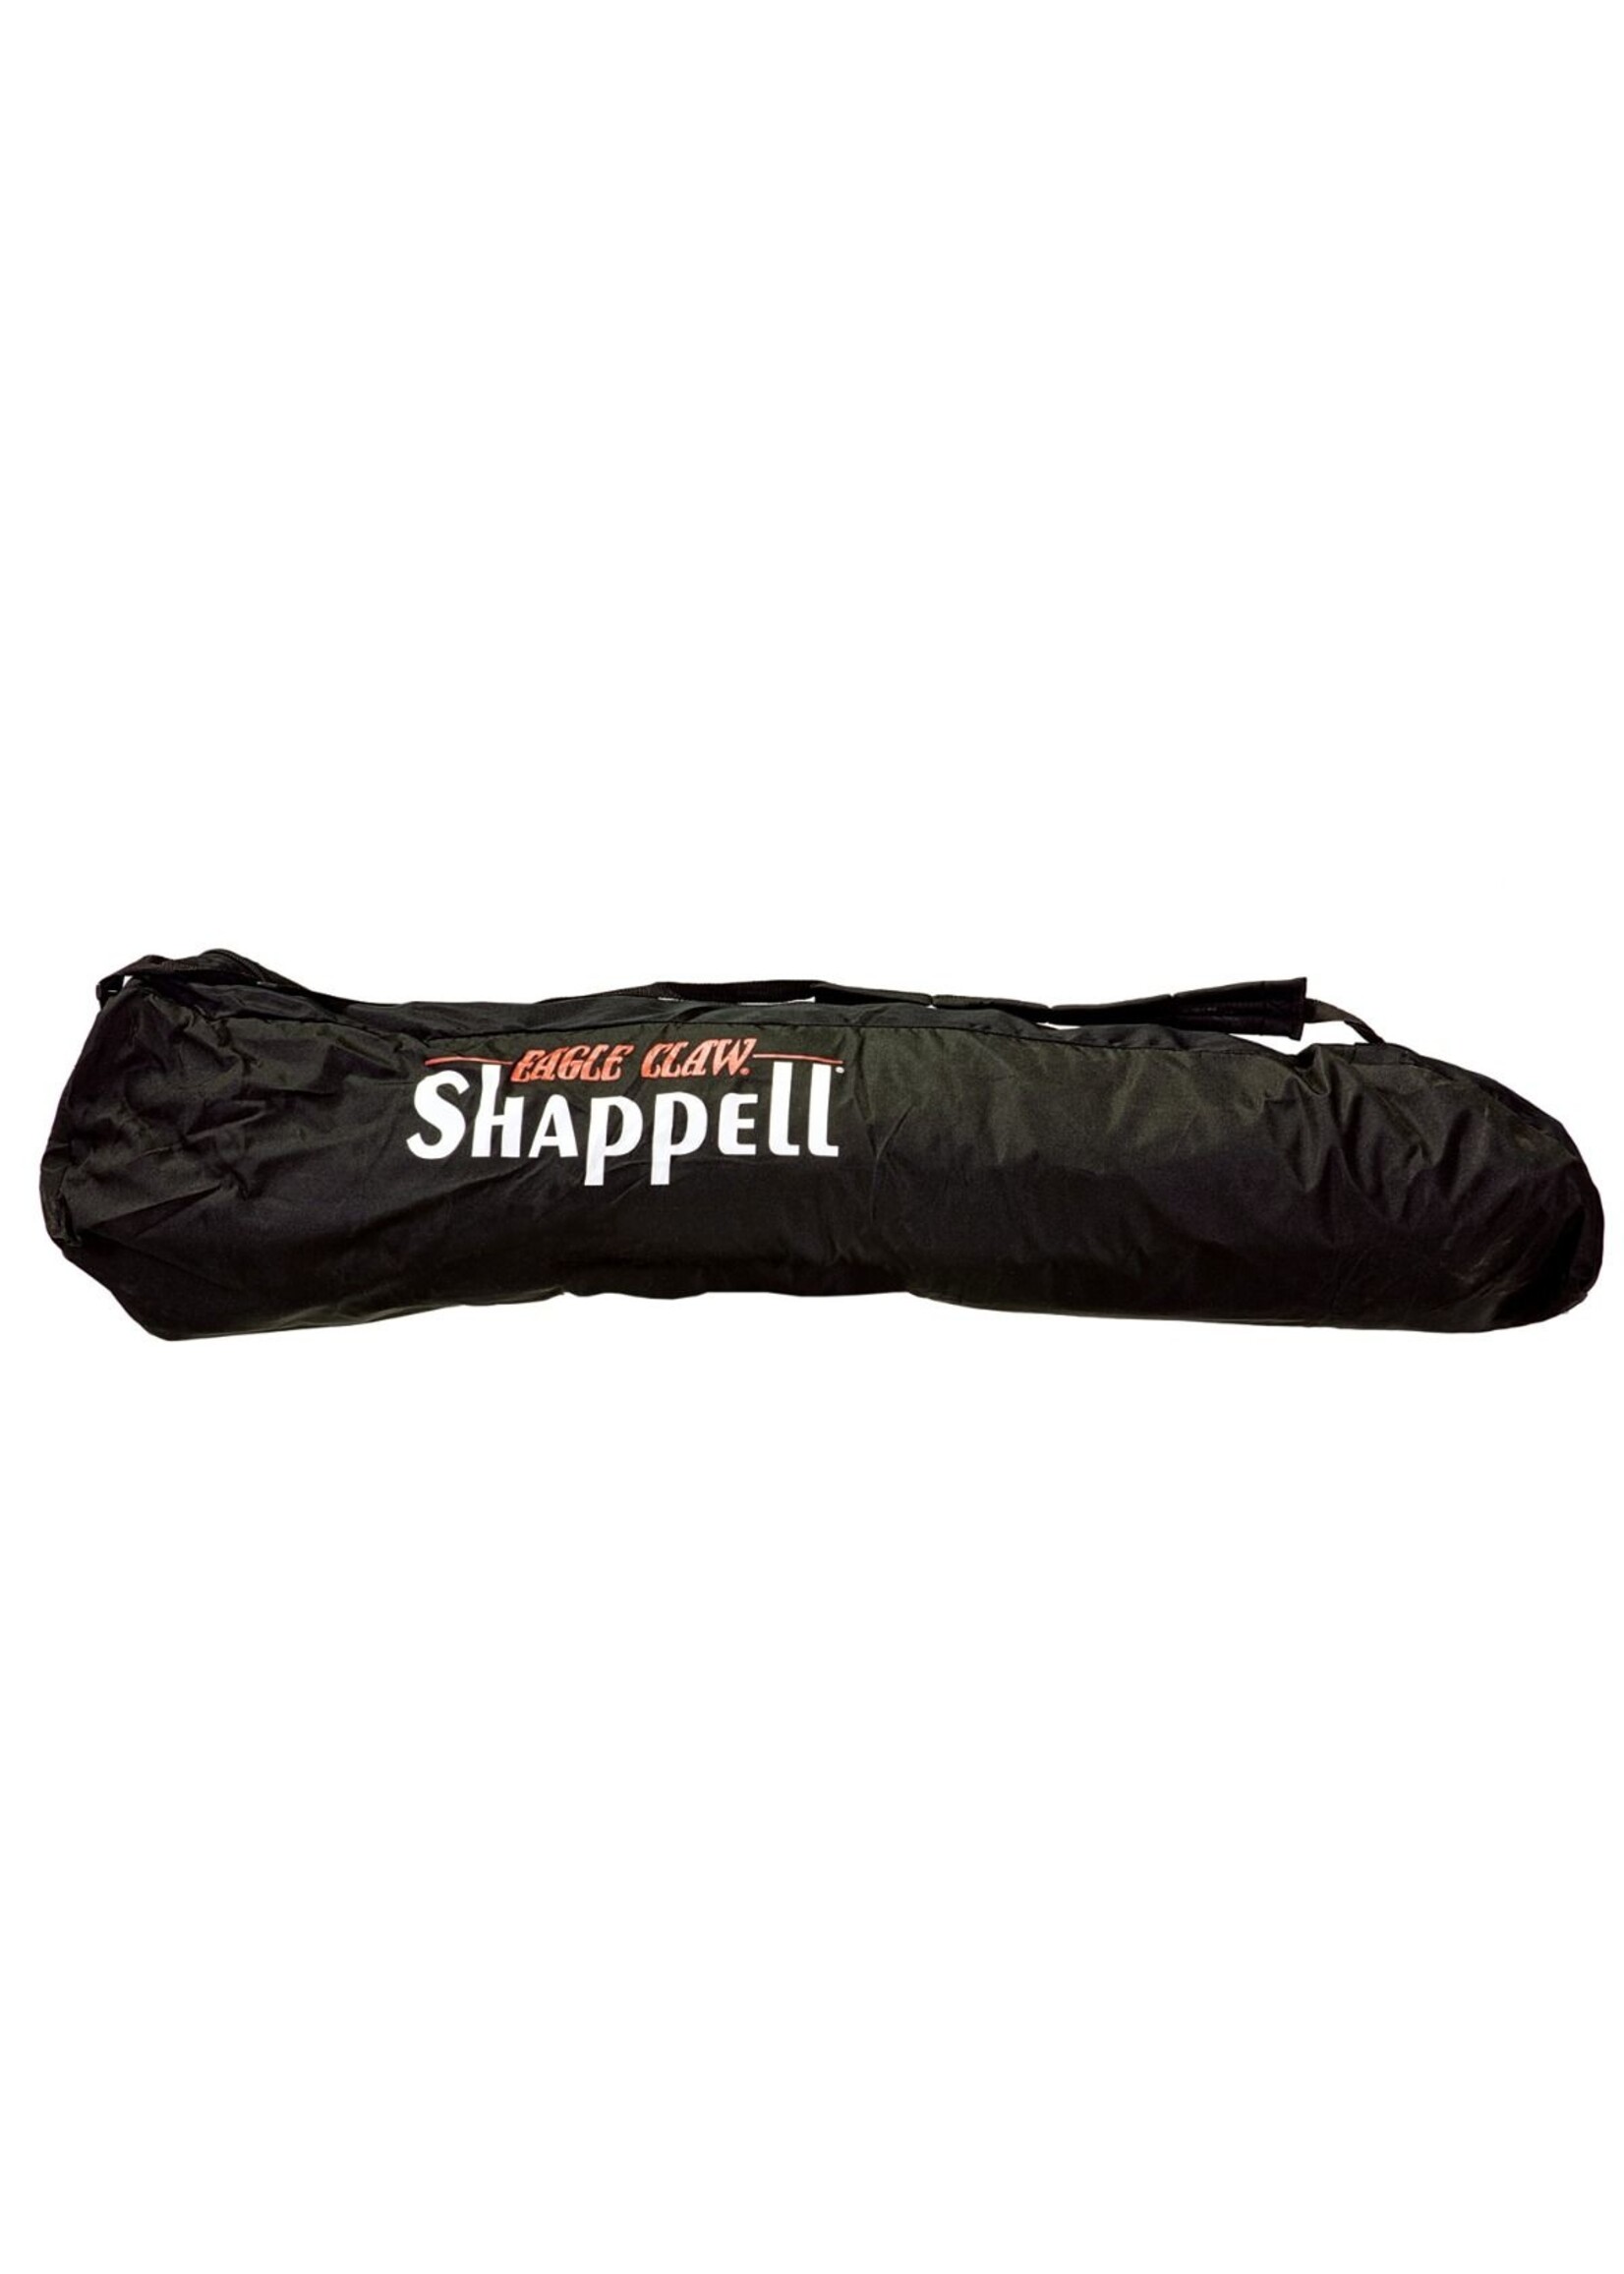 Shappell Shappell Wide House 6500 Insulated Ice Fishing Shelter